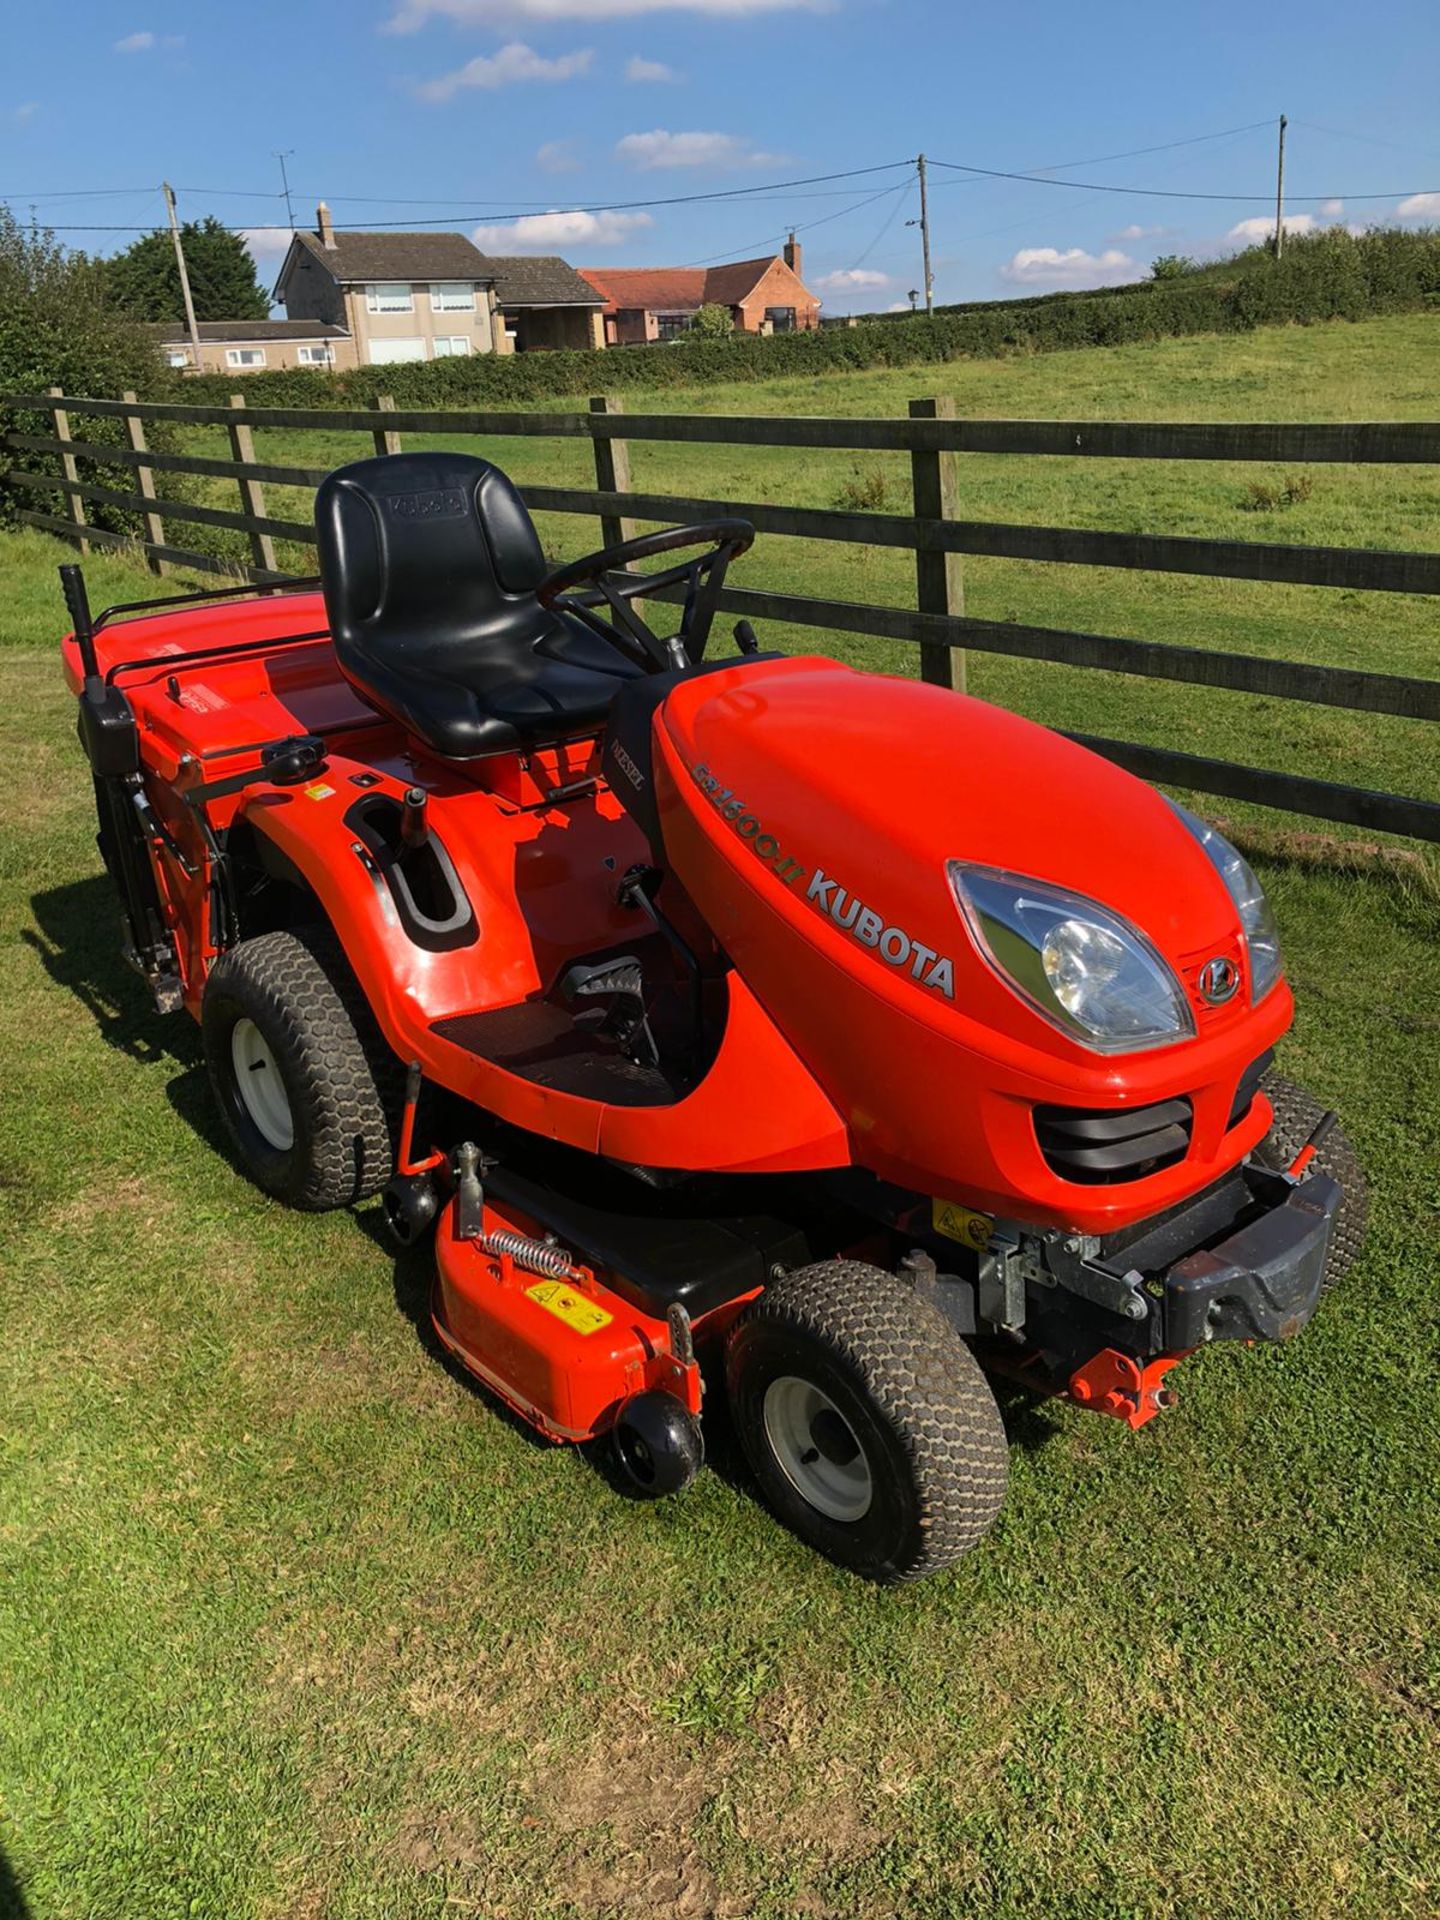 KUBOTA GR1600-II DIESEL RIDE ON LAWN MOWER, RUNS, DRIVES AND CUTS, EX DEMO CONDITION, ONLY 66 HOURS!